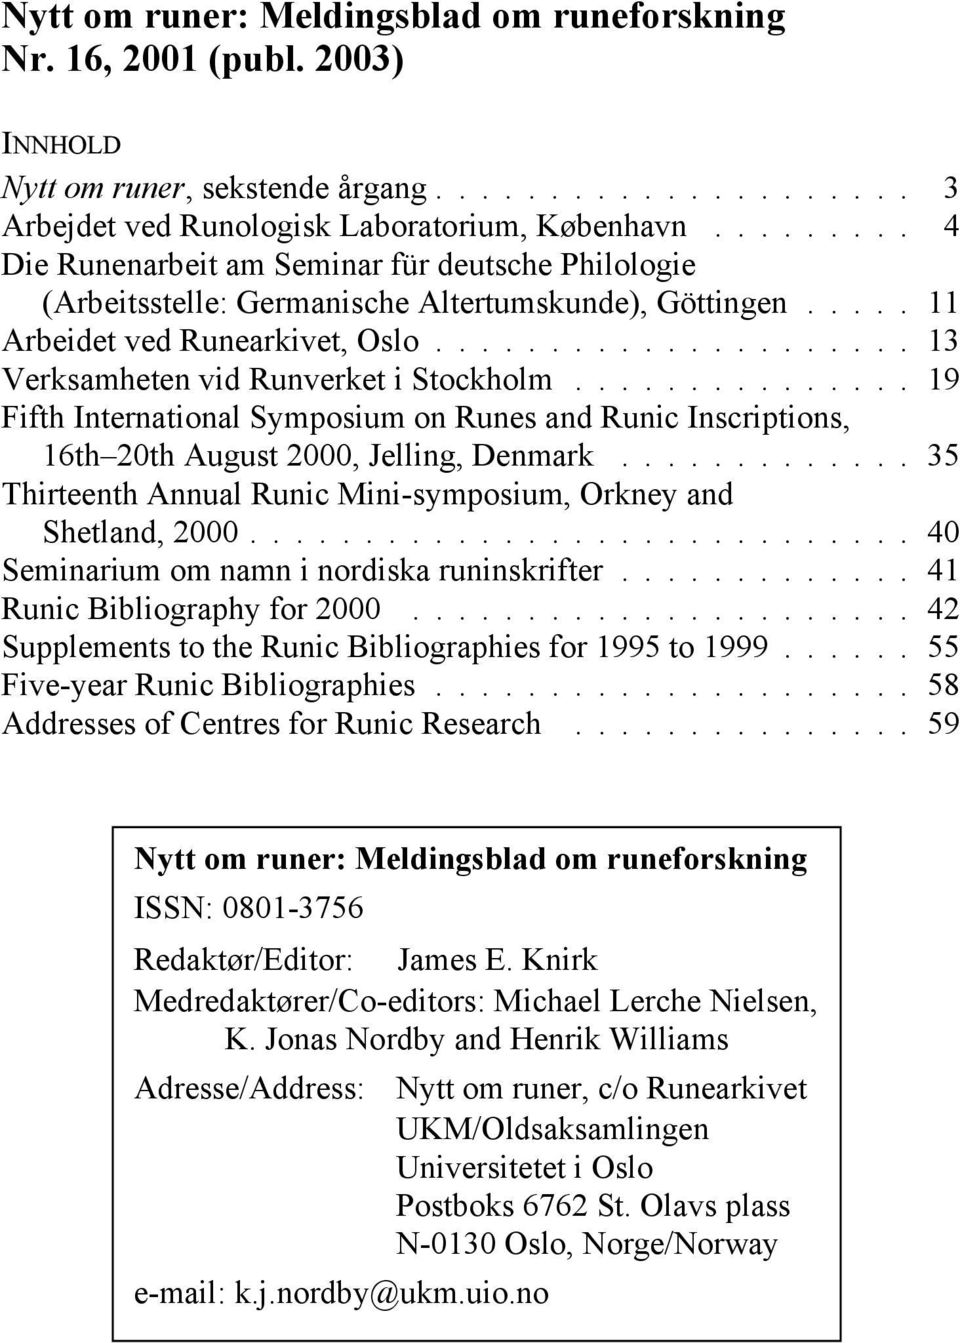 .............. 19 Fifth International Symposium on Runes and Runic Inscriptions, 16th 20th August 2000, Jelling, Denmark............. 35 Thirteenth Annual Runic Mini-symposium, Orkney and Shetland, 2000.